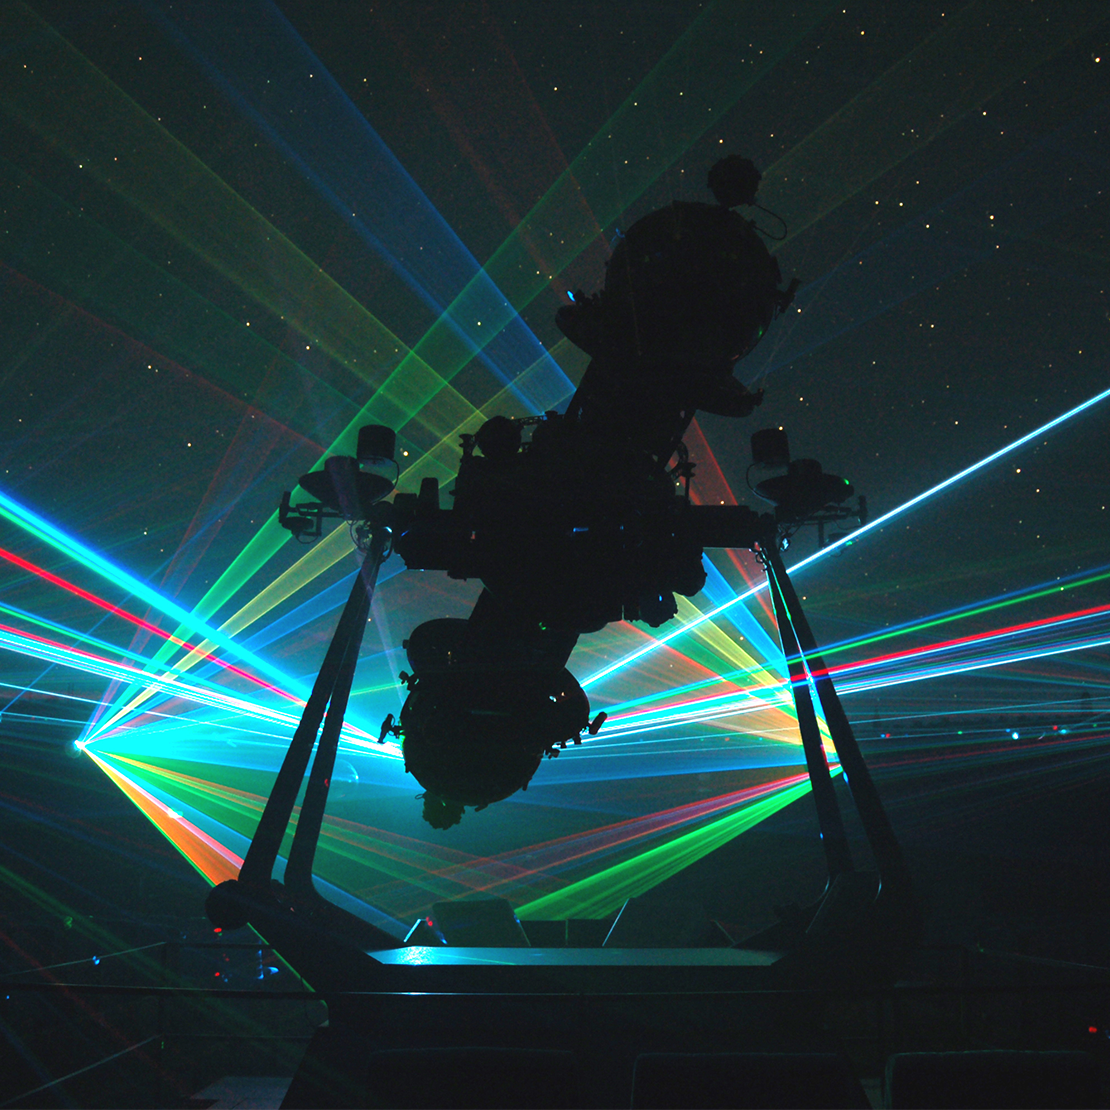 Star projector and laser show in the Planetarium at the Insulaner © SPB / Photo: Dr M. Staesche